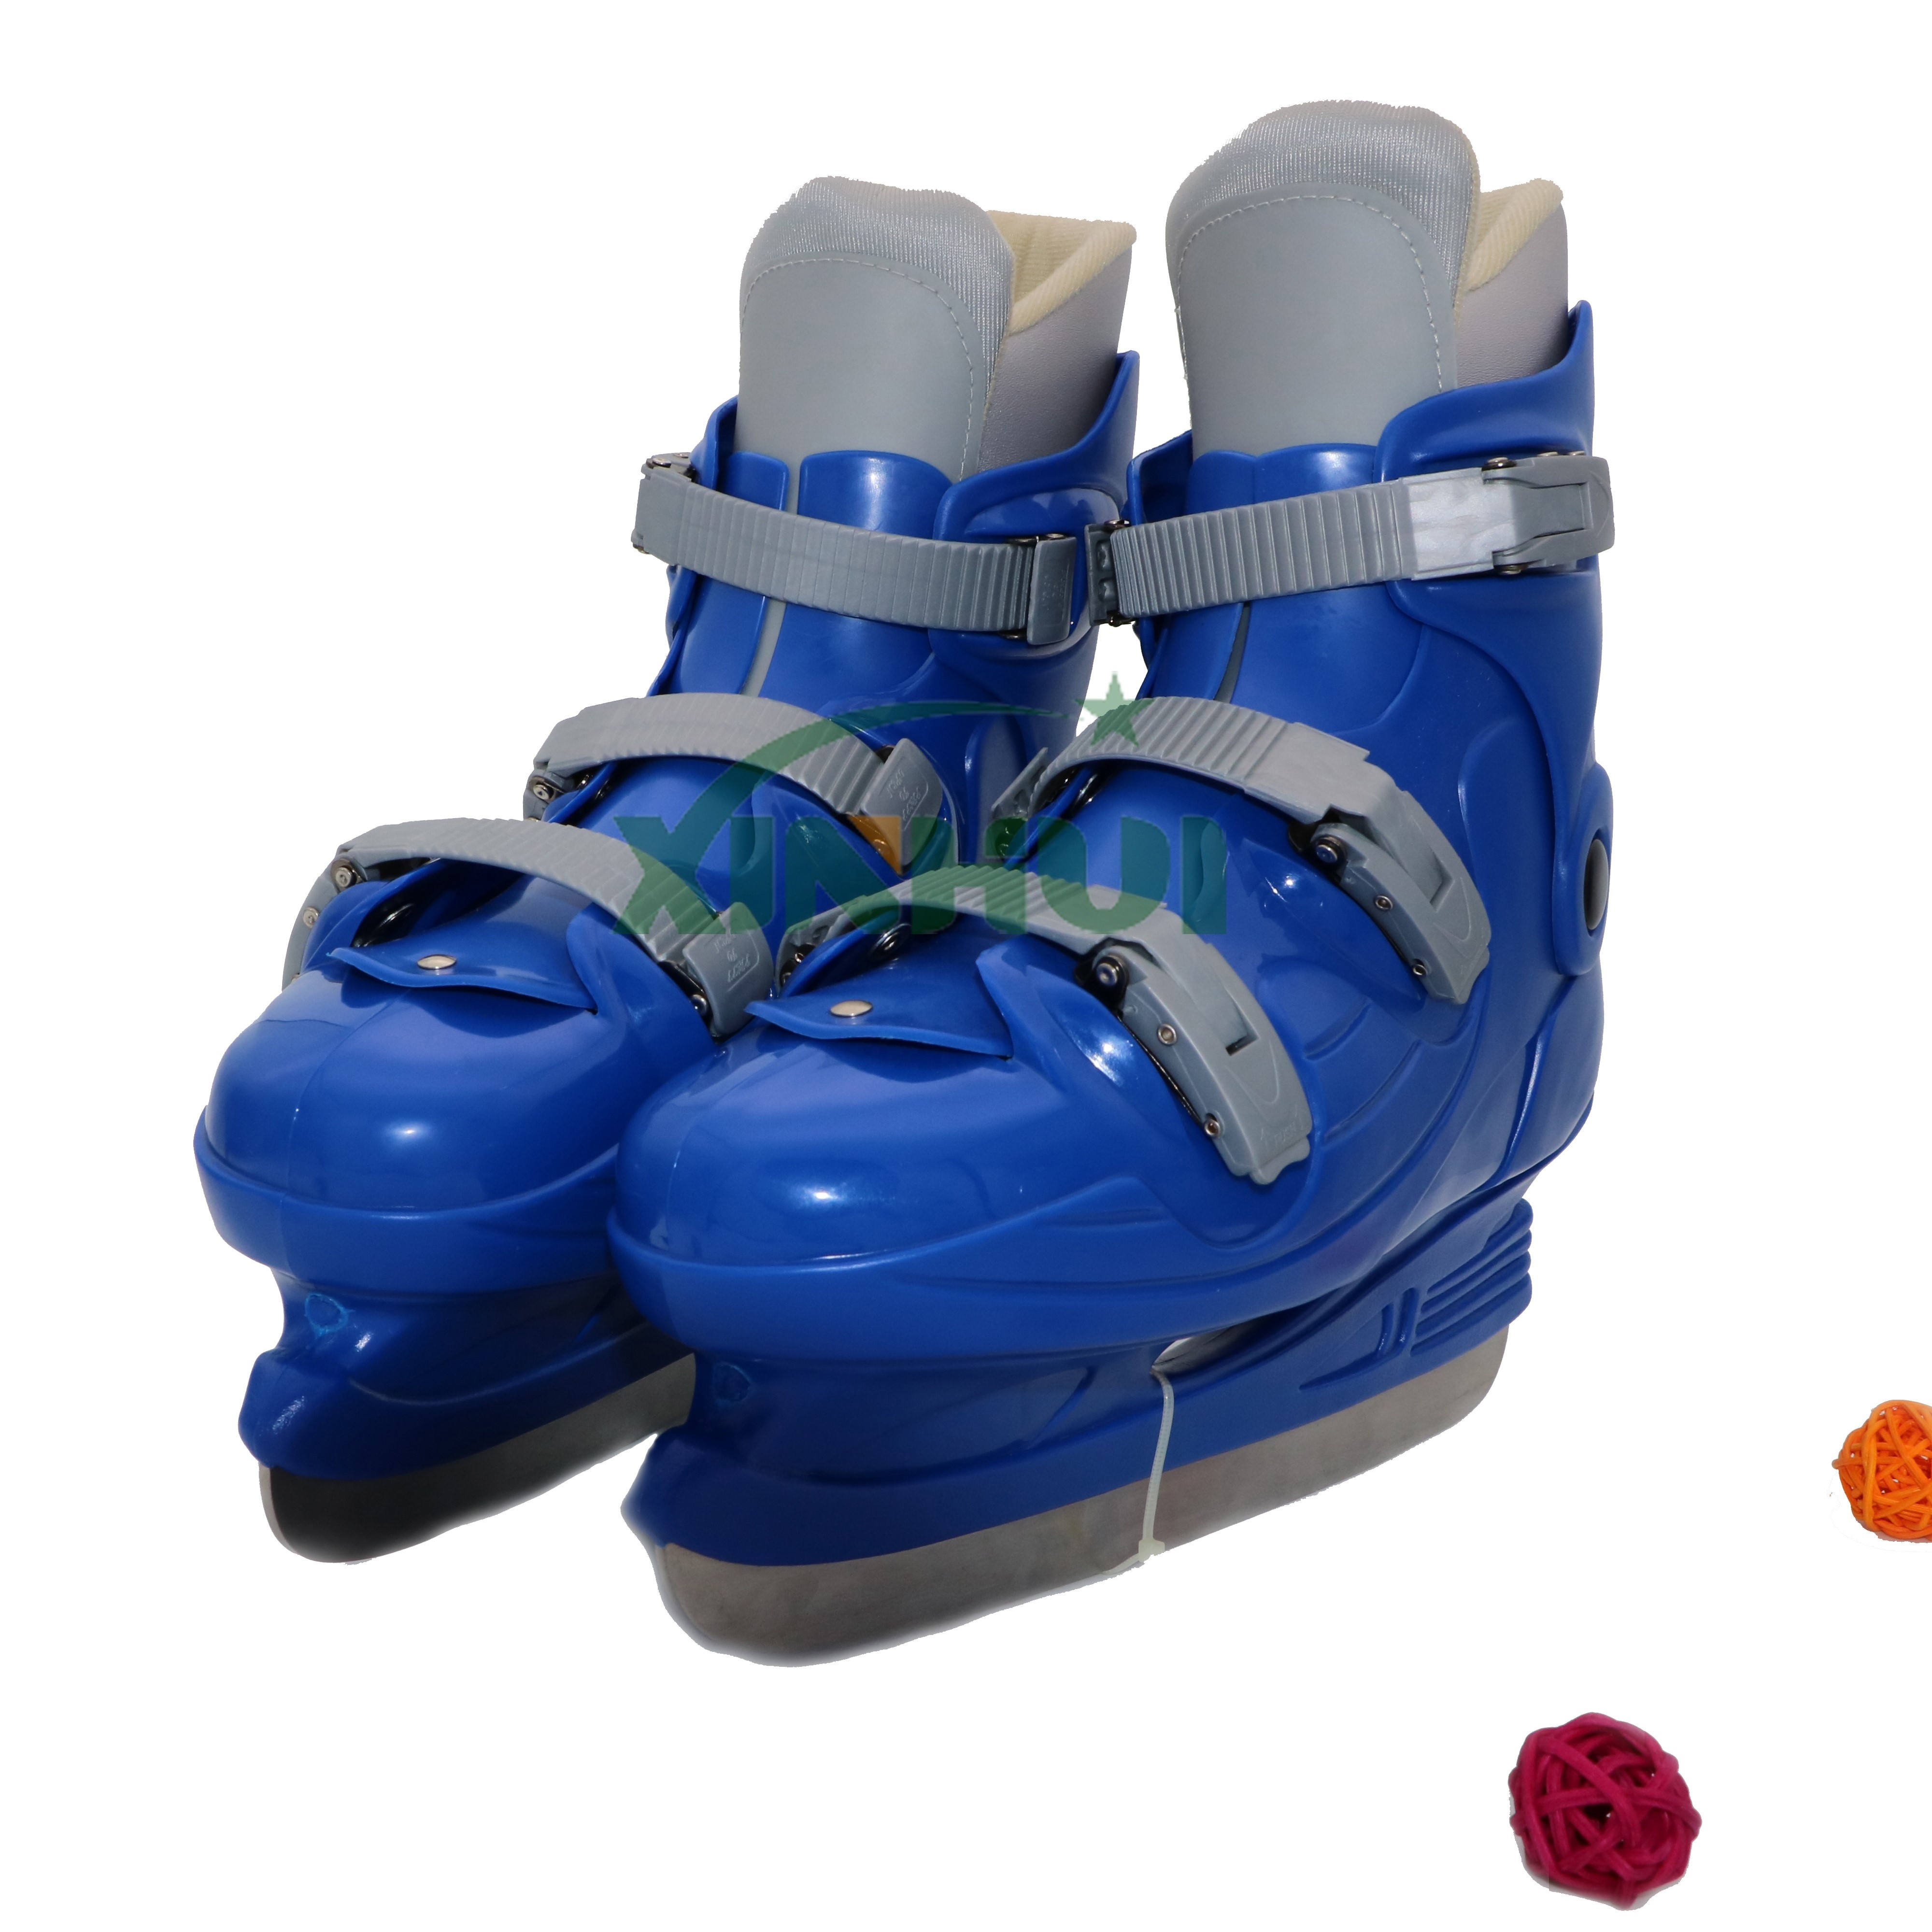 Ice skate rink rental shoes Blue color large quantity in stock cheap price wholesale